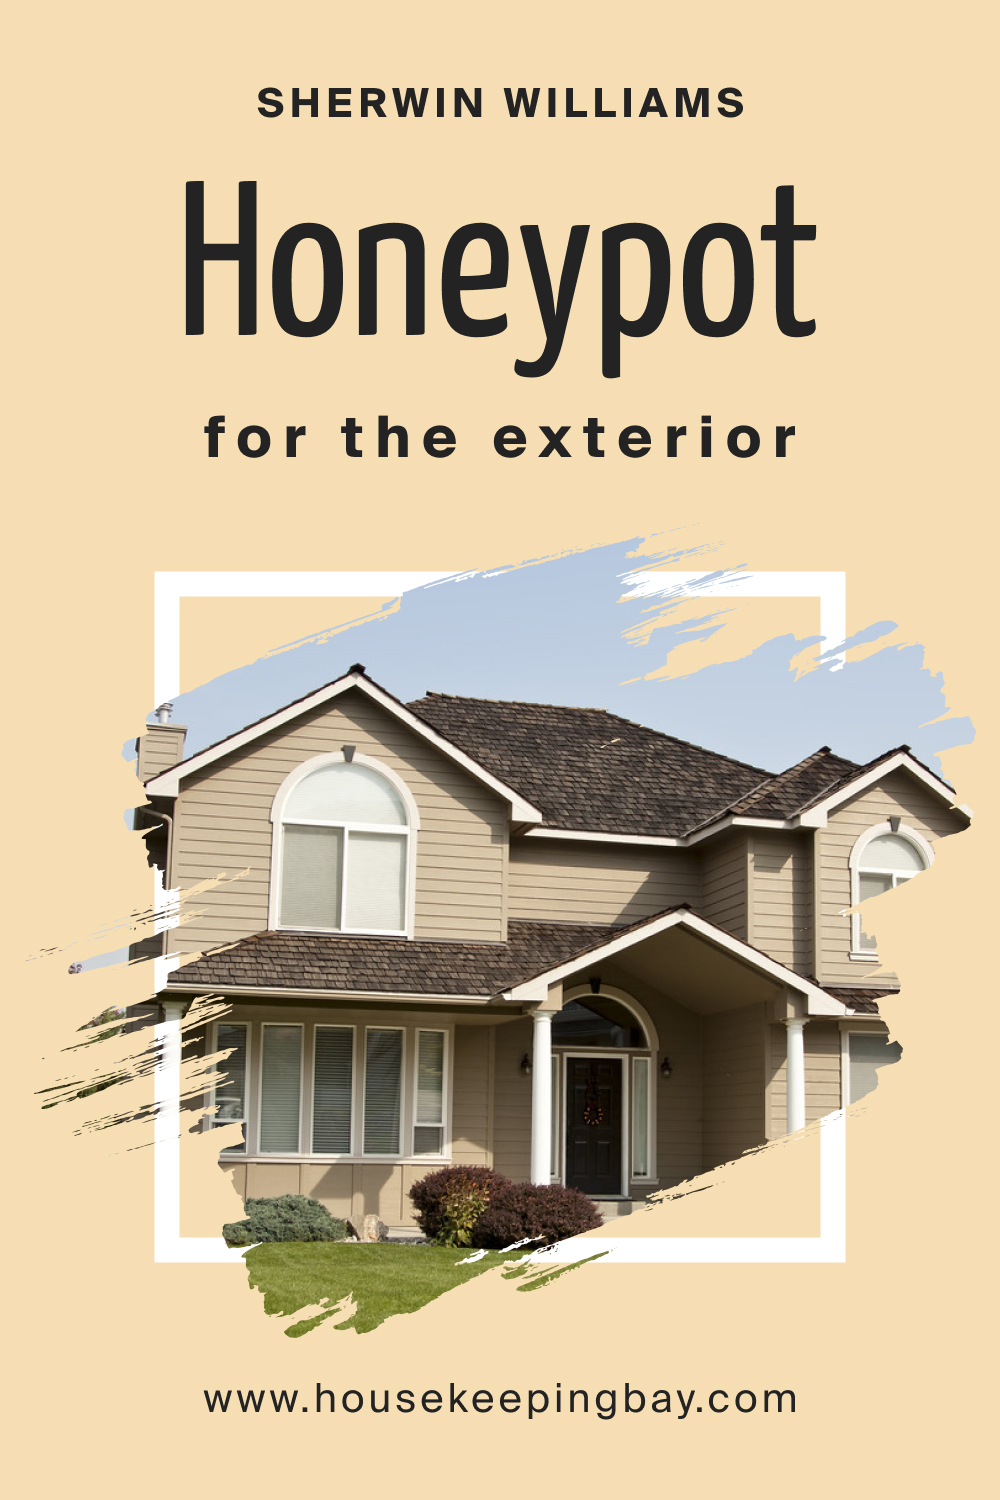 Sherwin Williams. SW 9663 Honeypot For the exterior